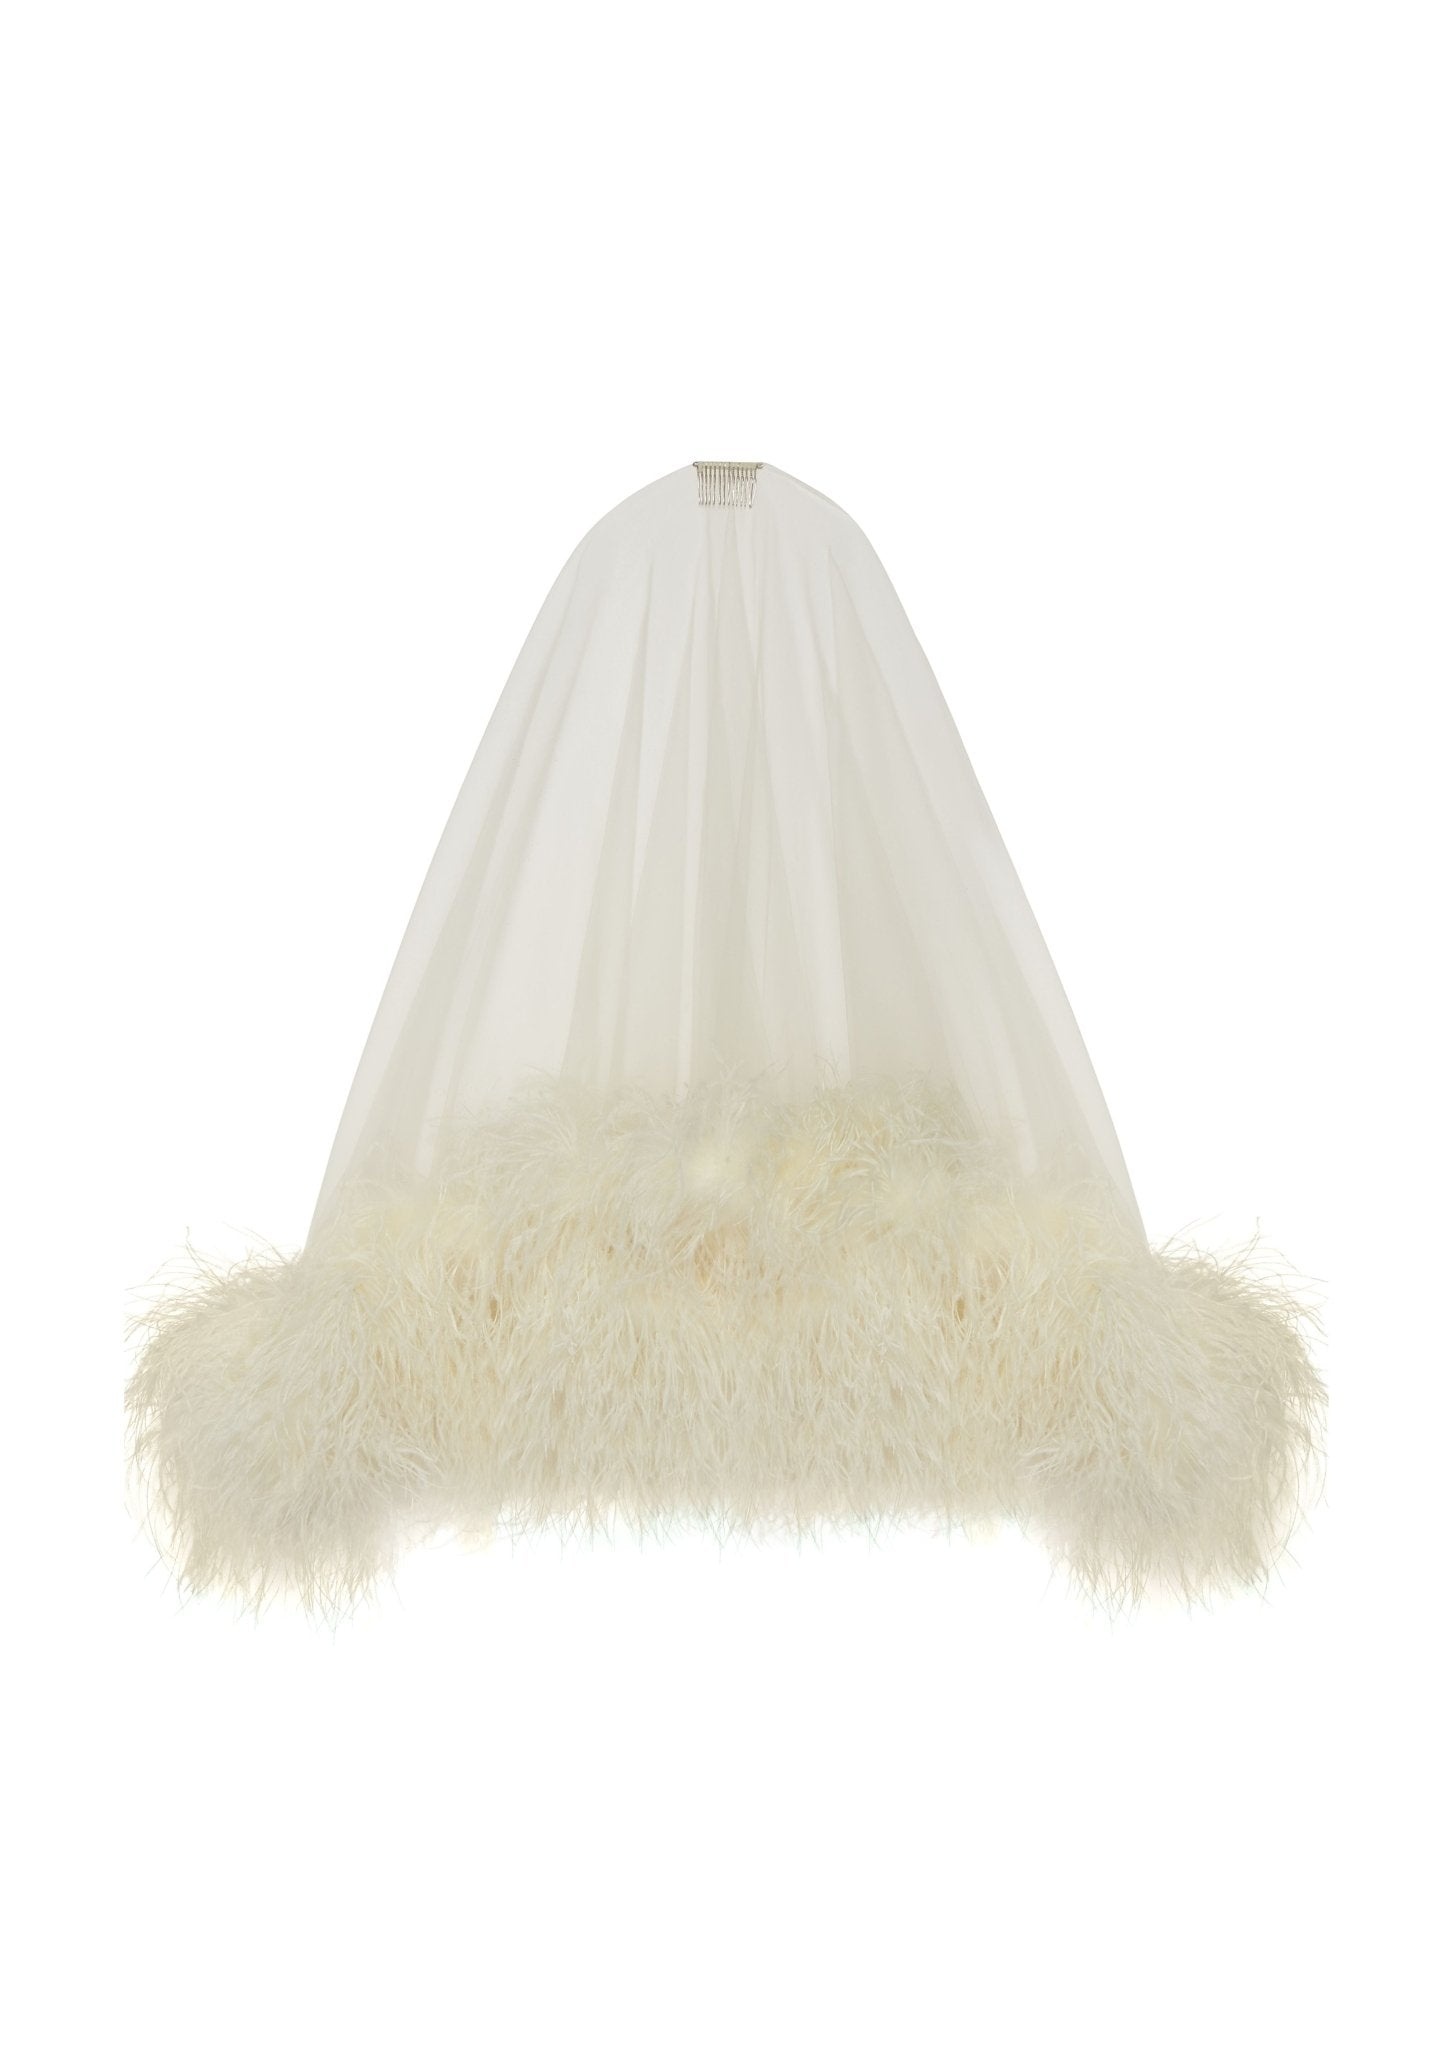 Tulle Veil With Feathers - 2